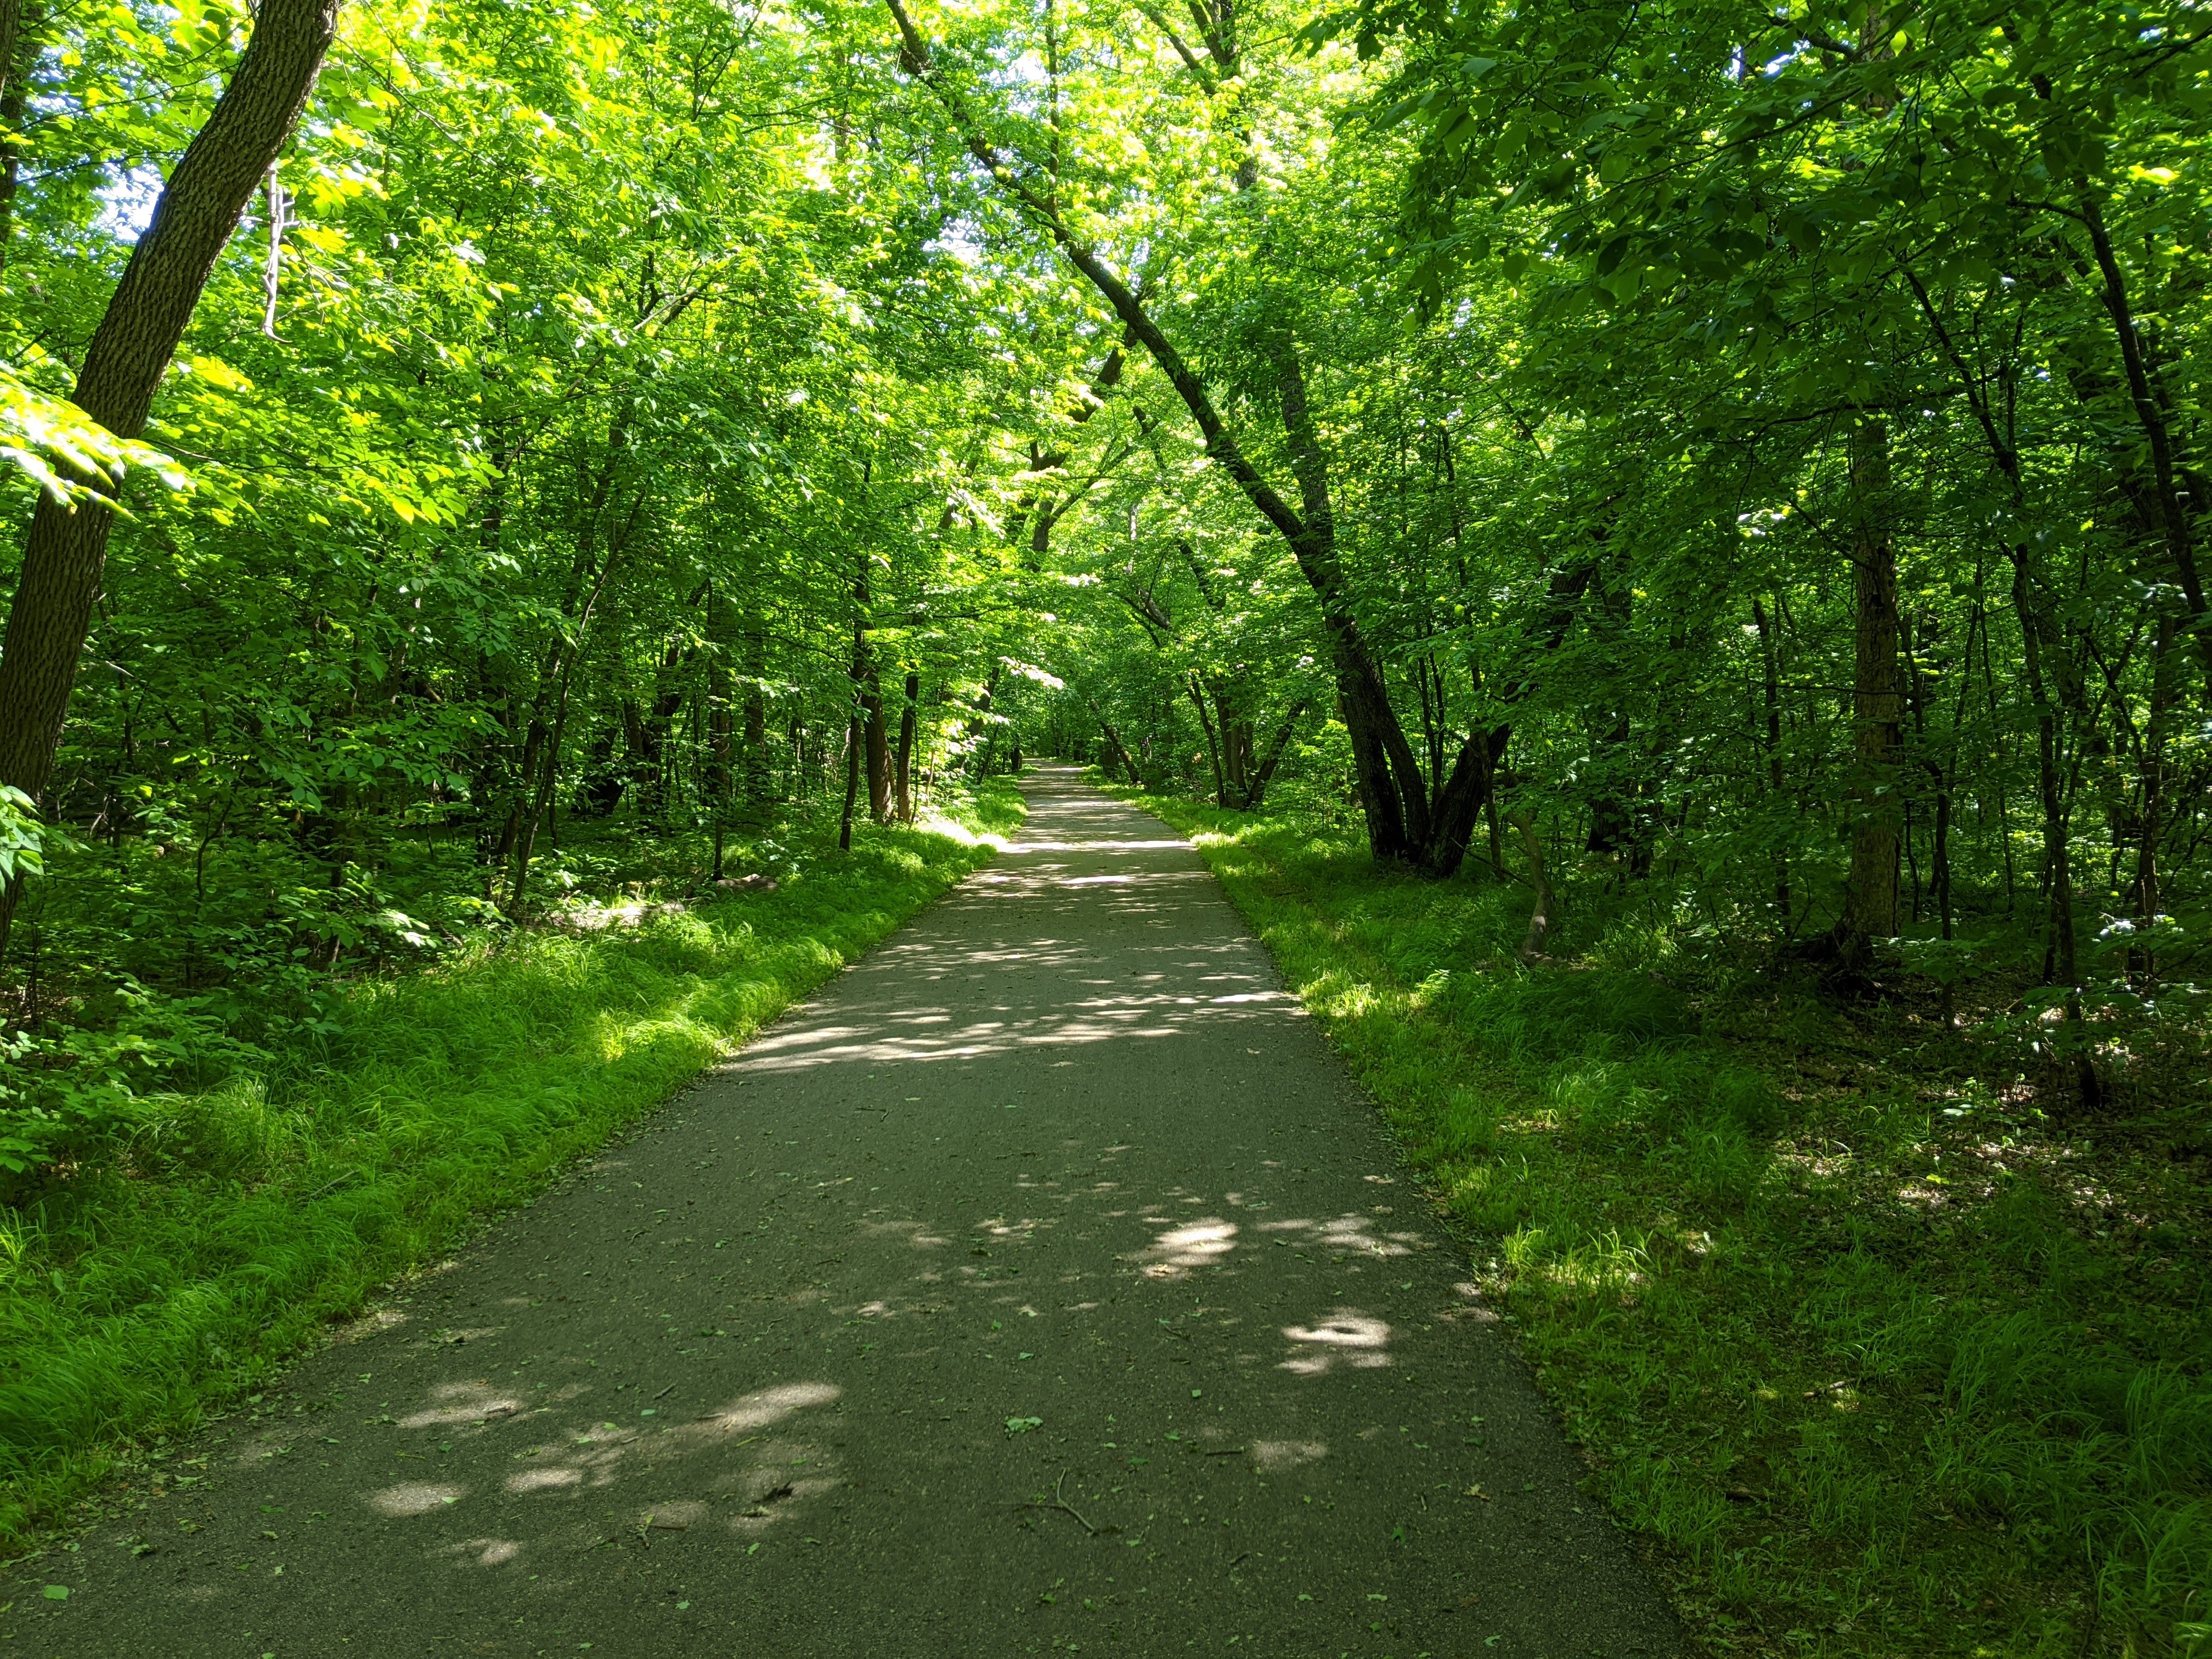 One of the many trails throughout the park.  Most are wide, flat and shaded by hardwood forest